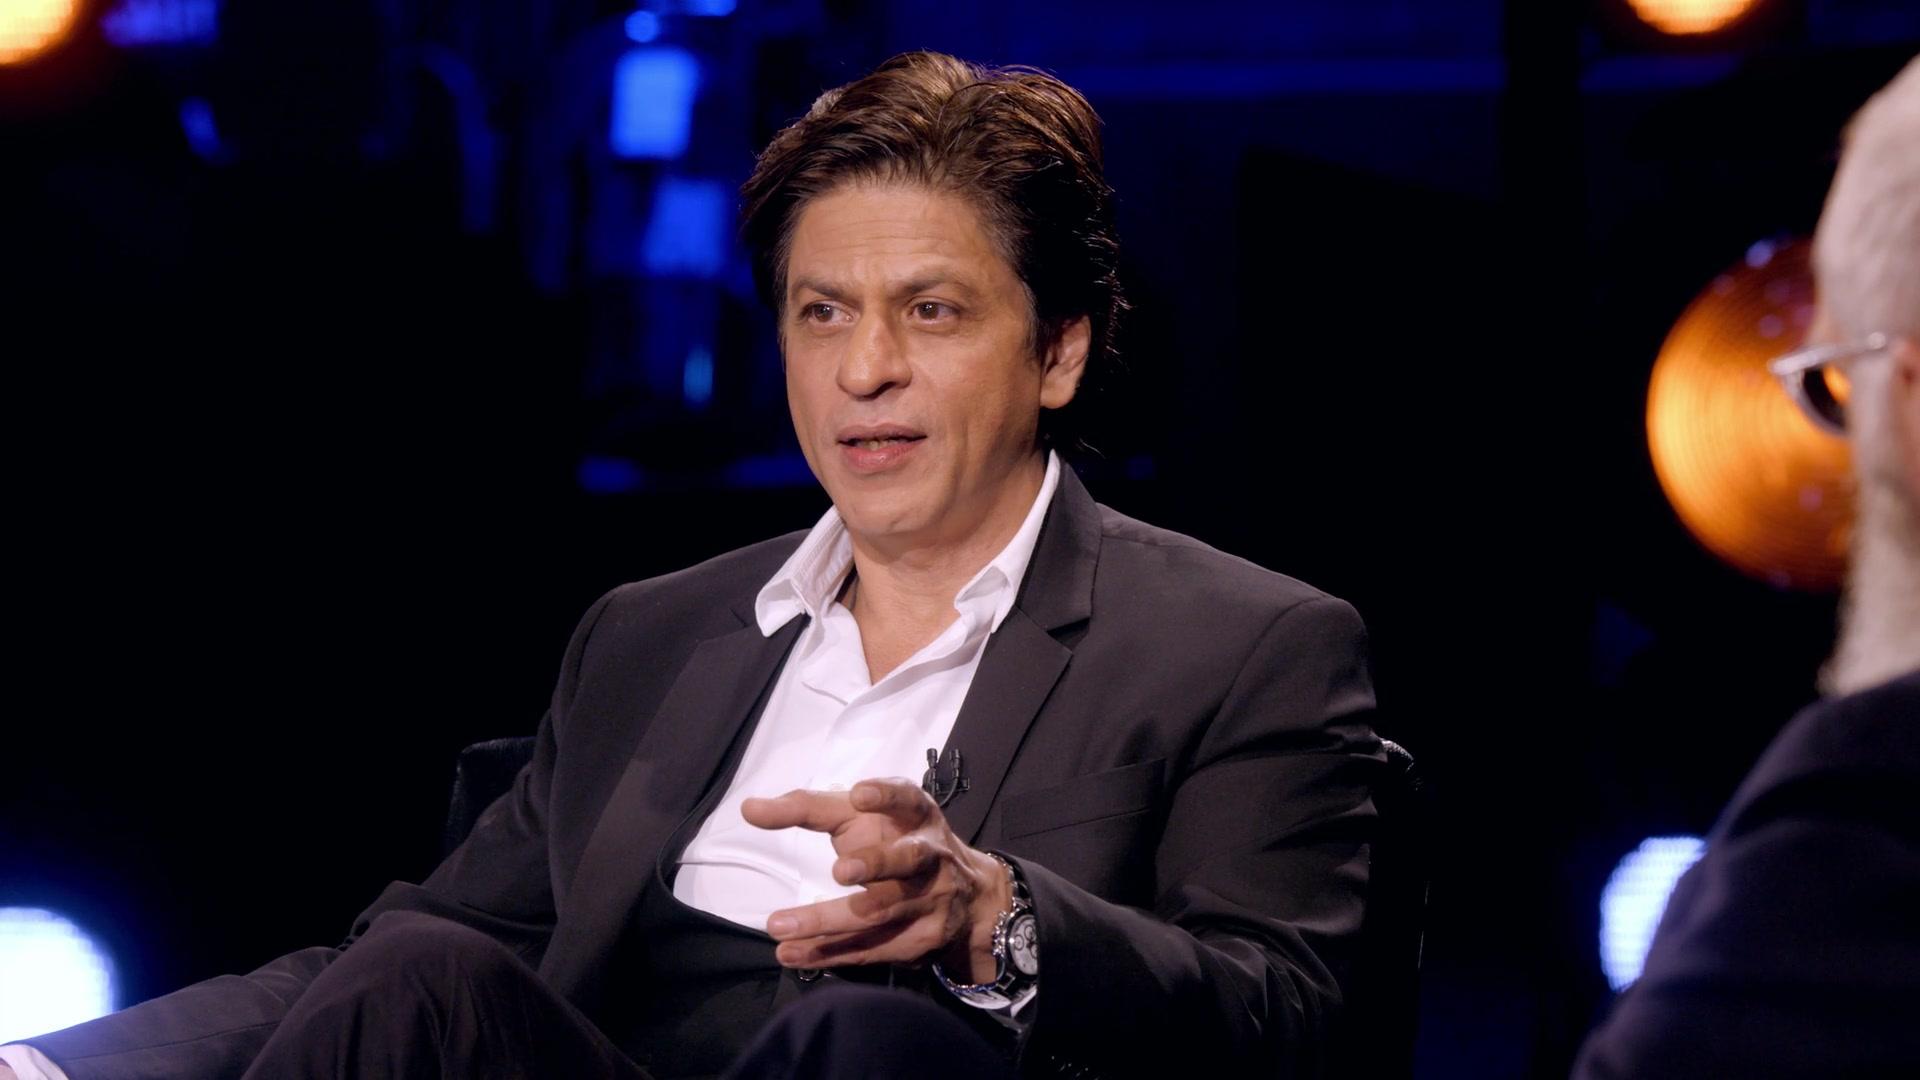 My Next Guest with David Letterman and Shah Rukh Khan (2019)